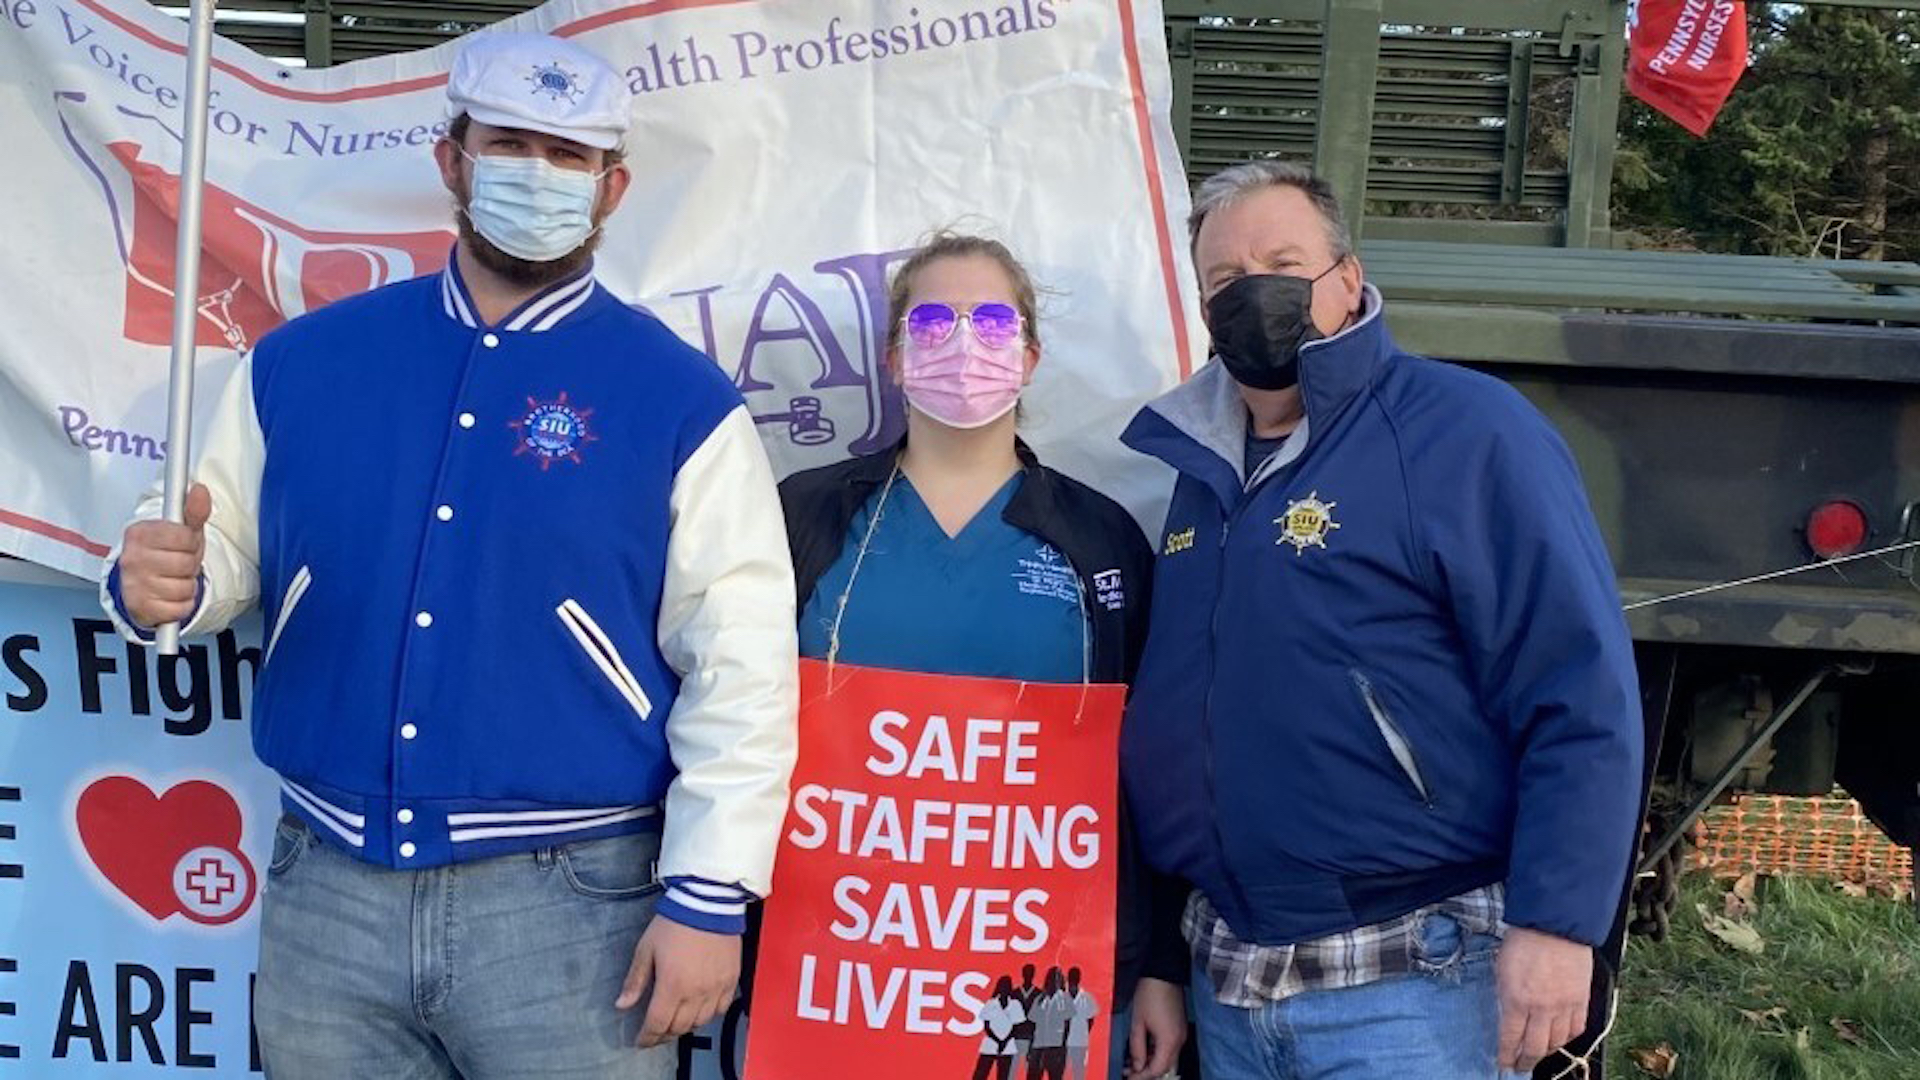 Scott Smith, right, and Scott Smith Jr., left, both seafarer union members, supported Julia Smith in her fight for safe staffing at St. Mary Medical Center in Langhorne.